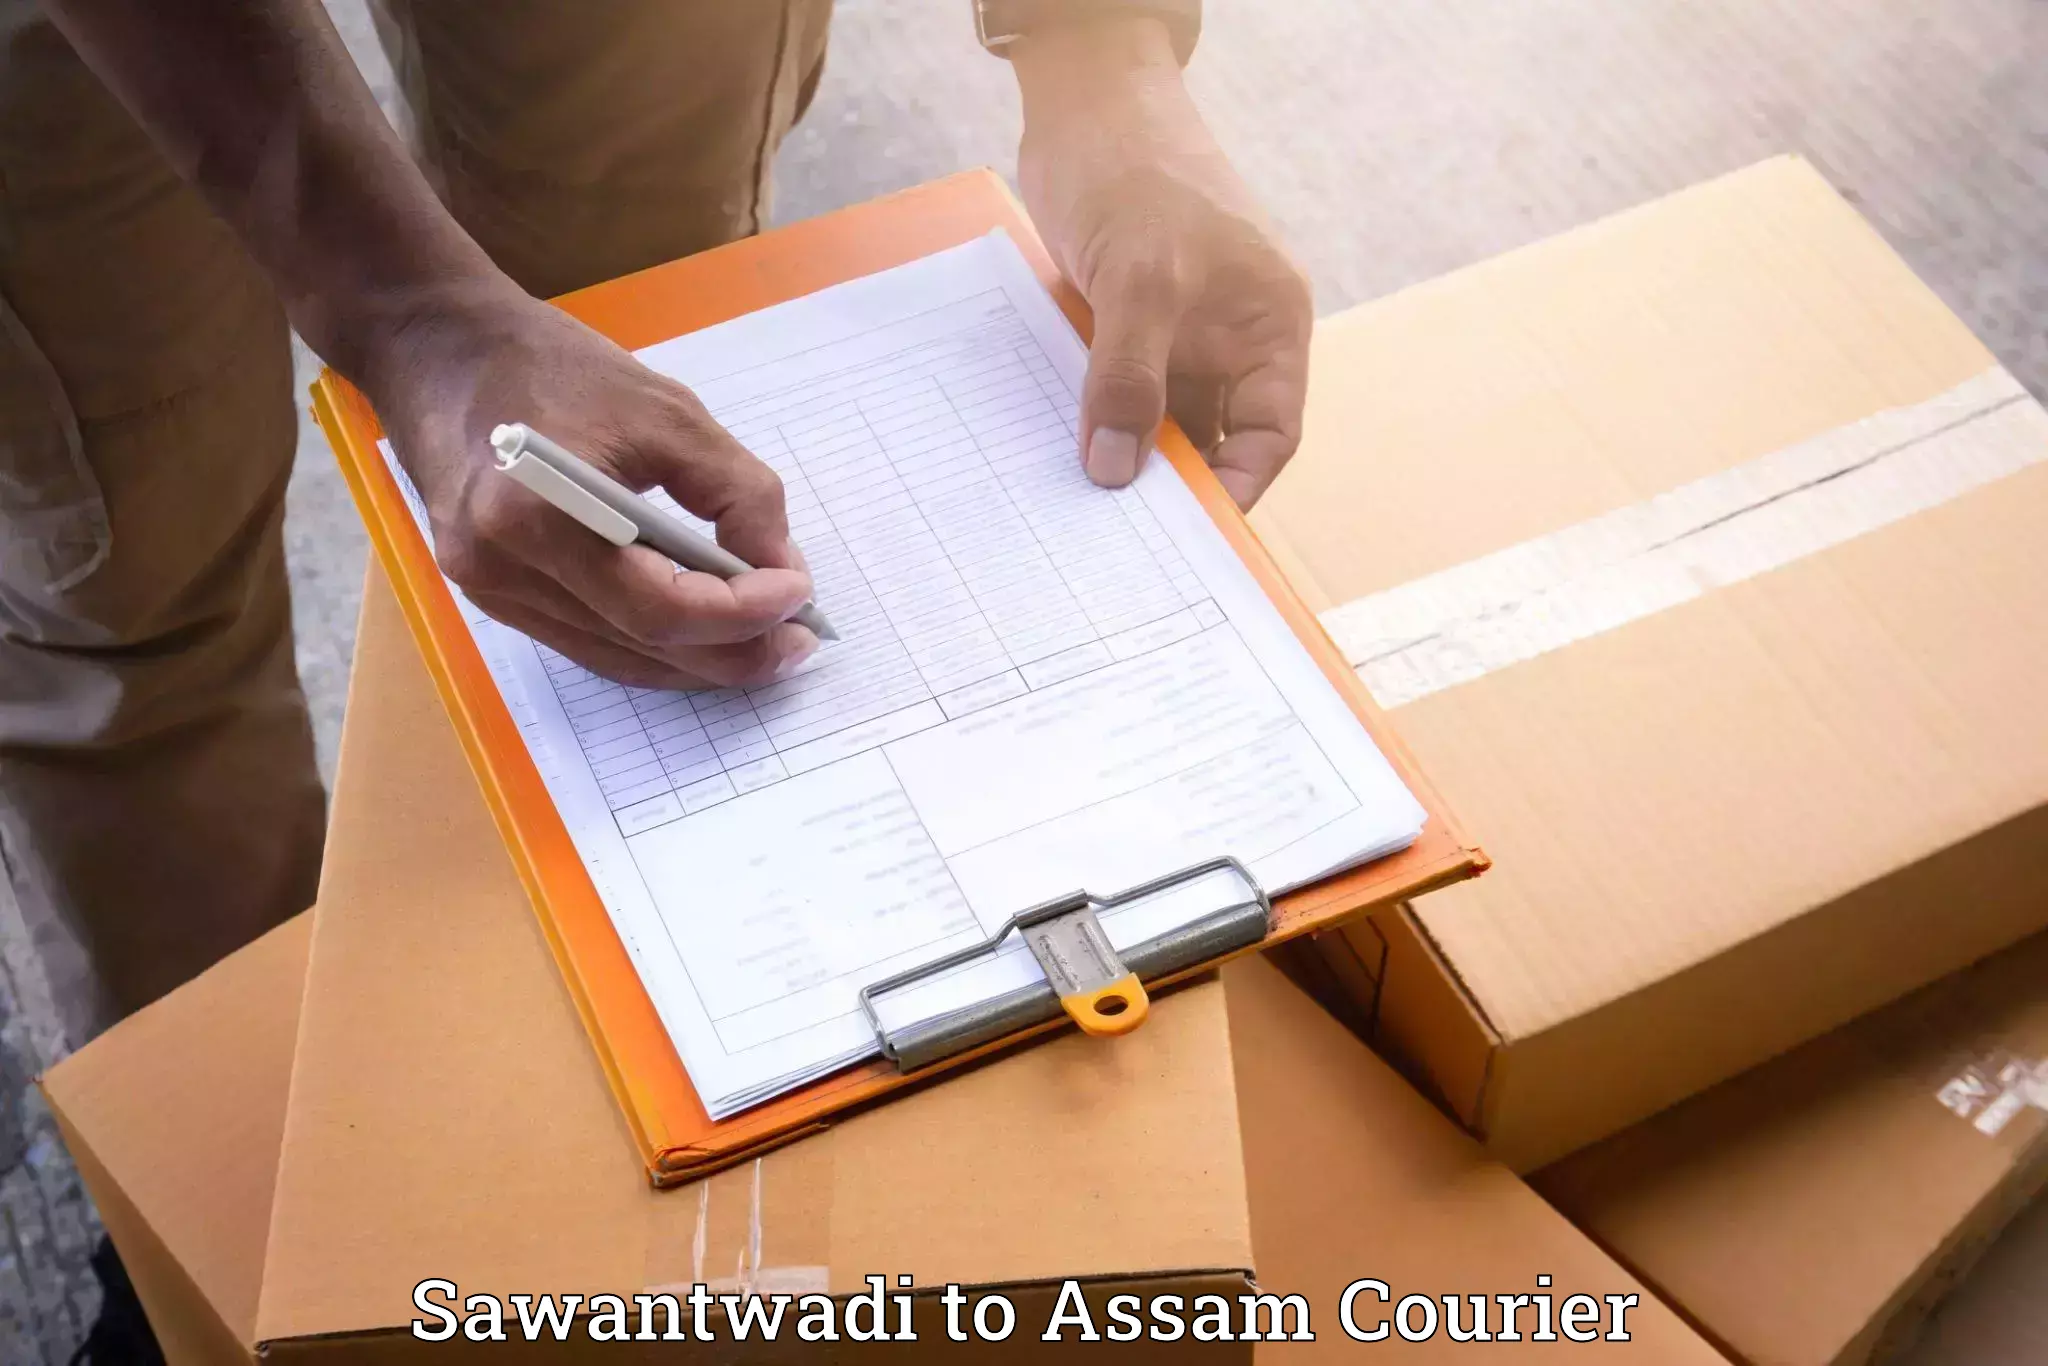 Specialized moving company Sawantwadi to Lala Assam